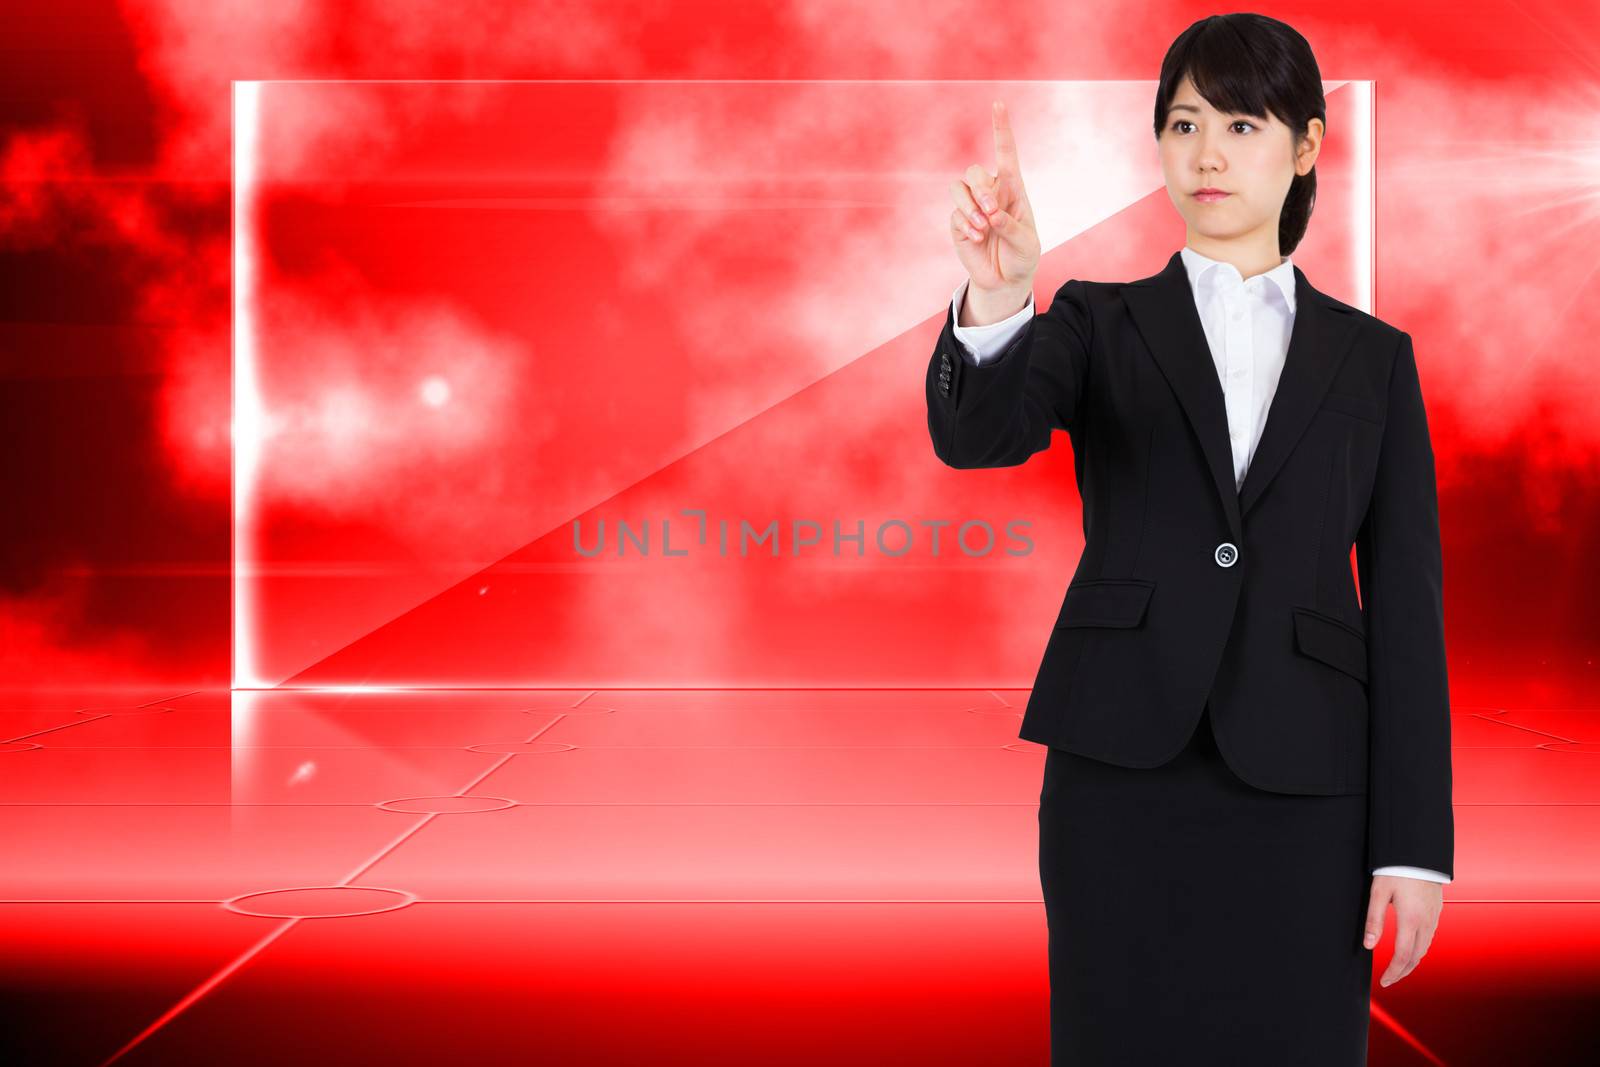 Composite image of focused businesswoman pointing by Wavebreakmedia